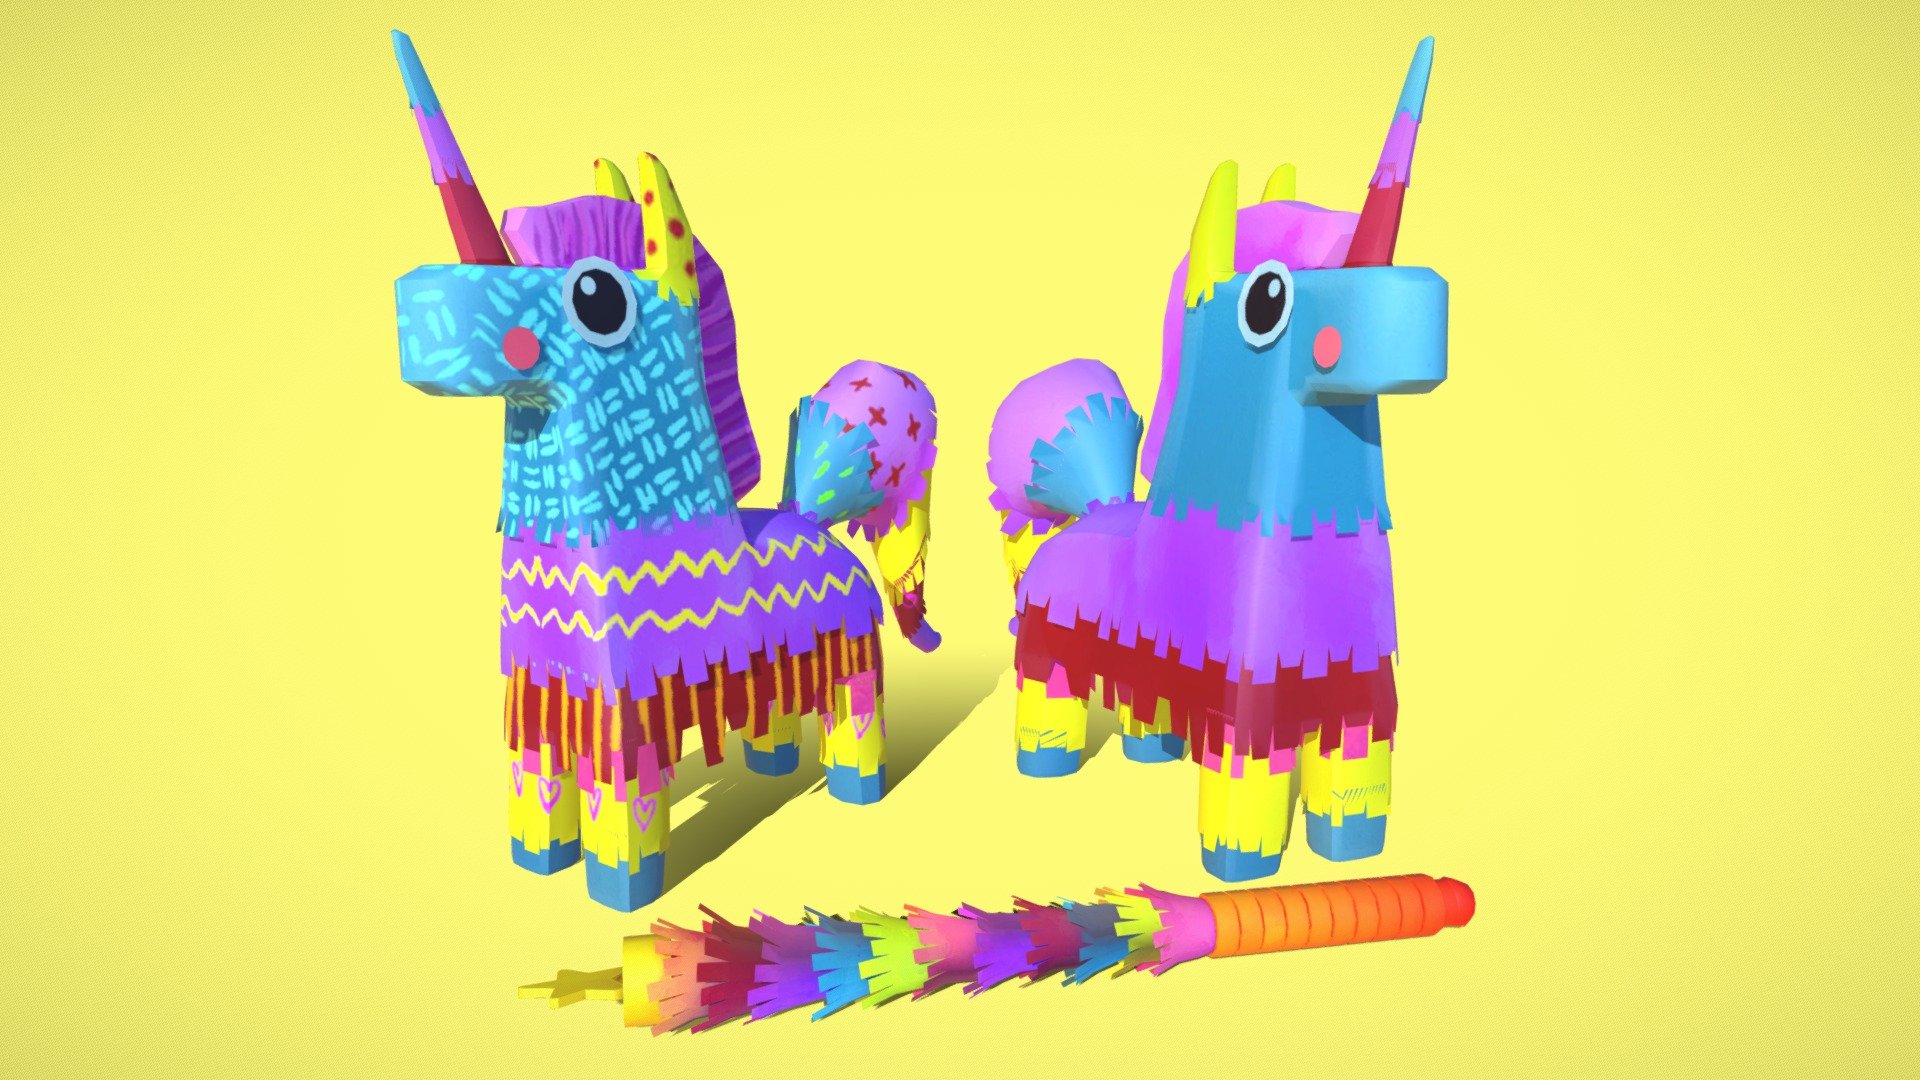 Cute pinata pack with watercolor textures ready to be integrated into a game ! Pack also contain exploded versions of the pinata (26 and 87 parts) so you can switch it in Unity or Unreal when you want to make it explode :)

You can fill it with my low poly stylized candy pack: https://sketchfab.com/3d-models/low-poly-stylized-candy-pack-60ecdd93e5f540749df2467cea7ac6c7

Please feel free to contact me if you have any questions or problems with the assets 3d model